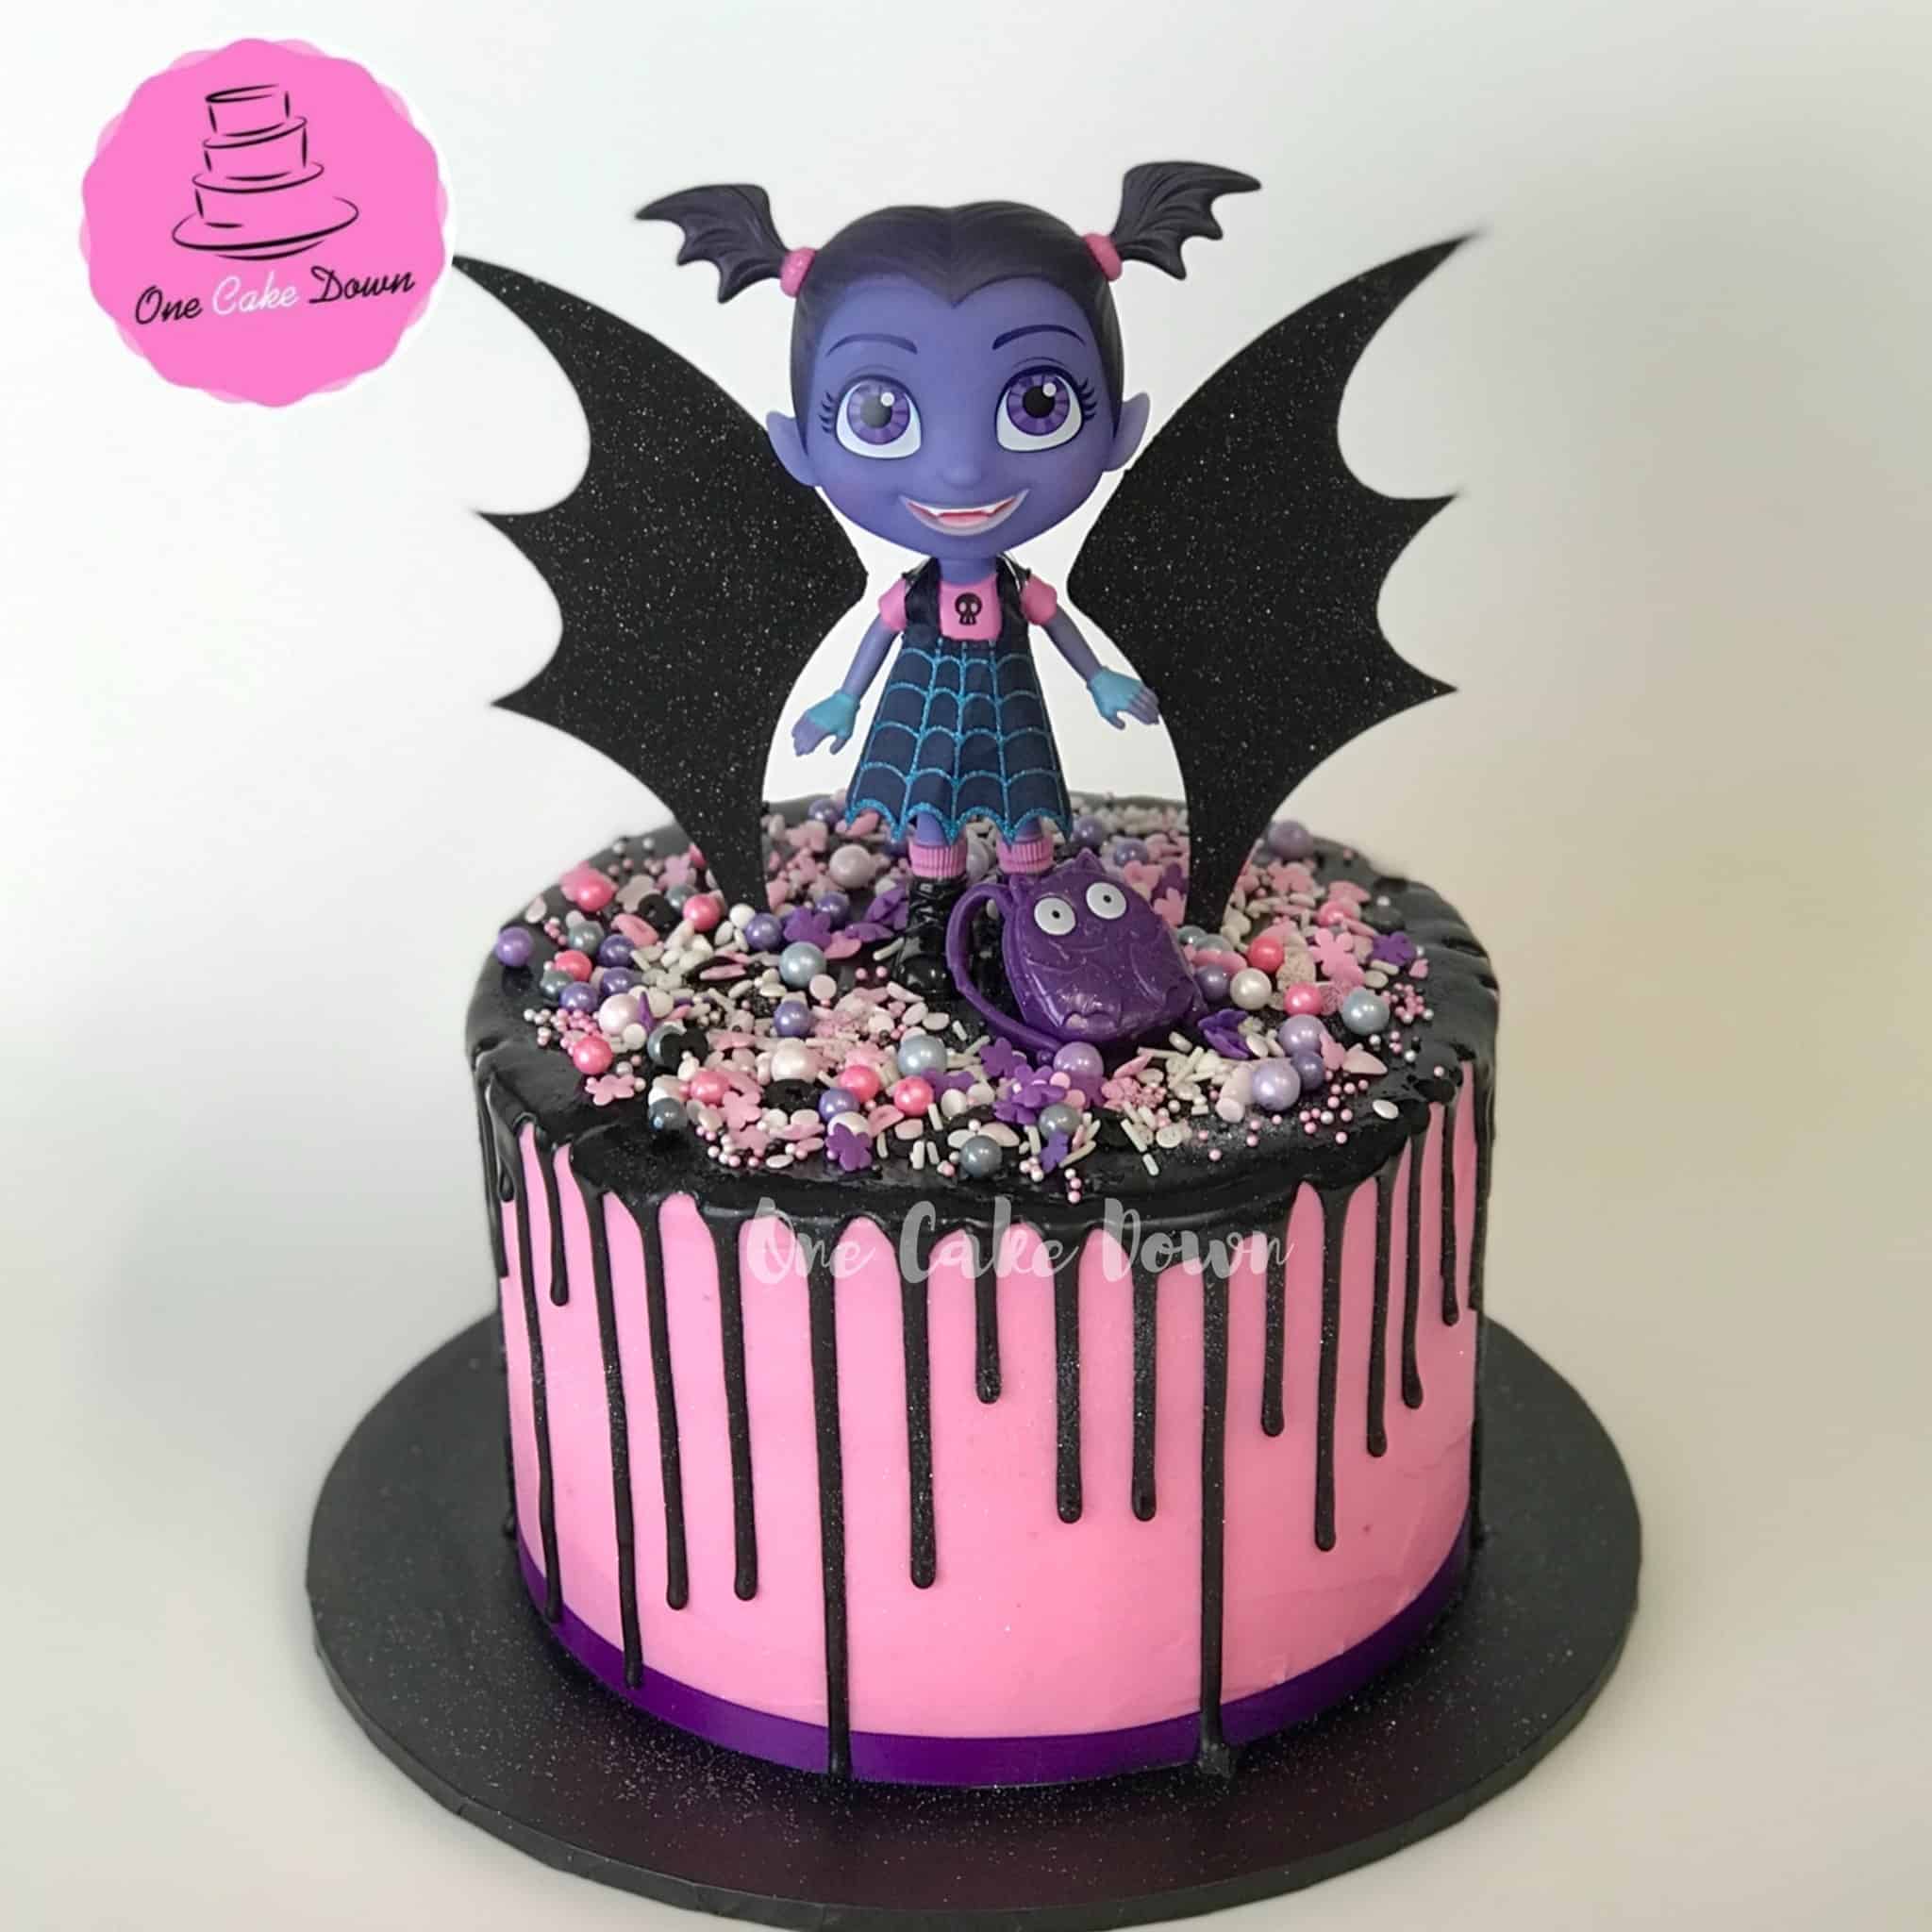 Halloween Cakes That Are Spooky and Deliciously Fun - Woman's World